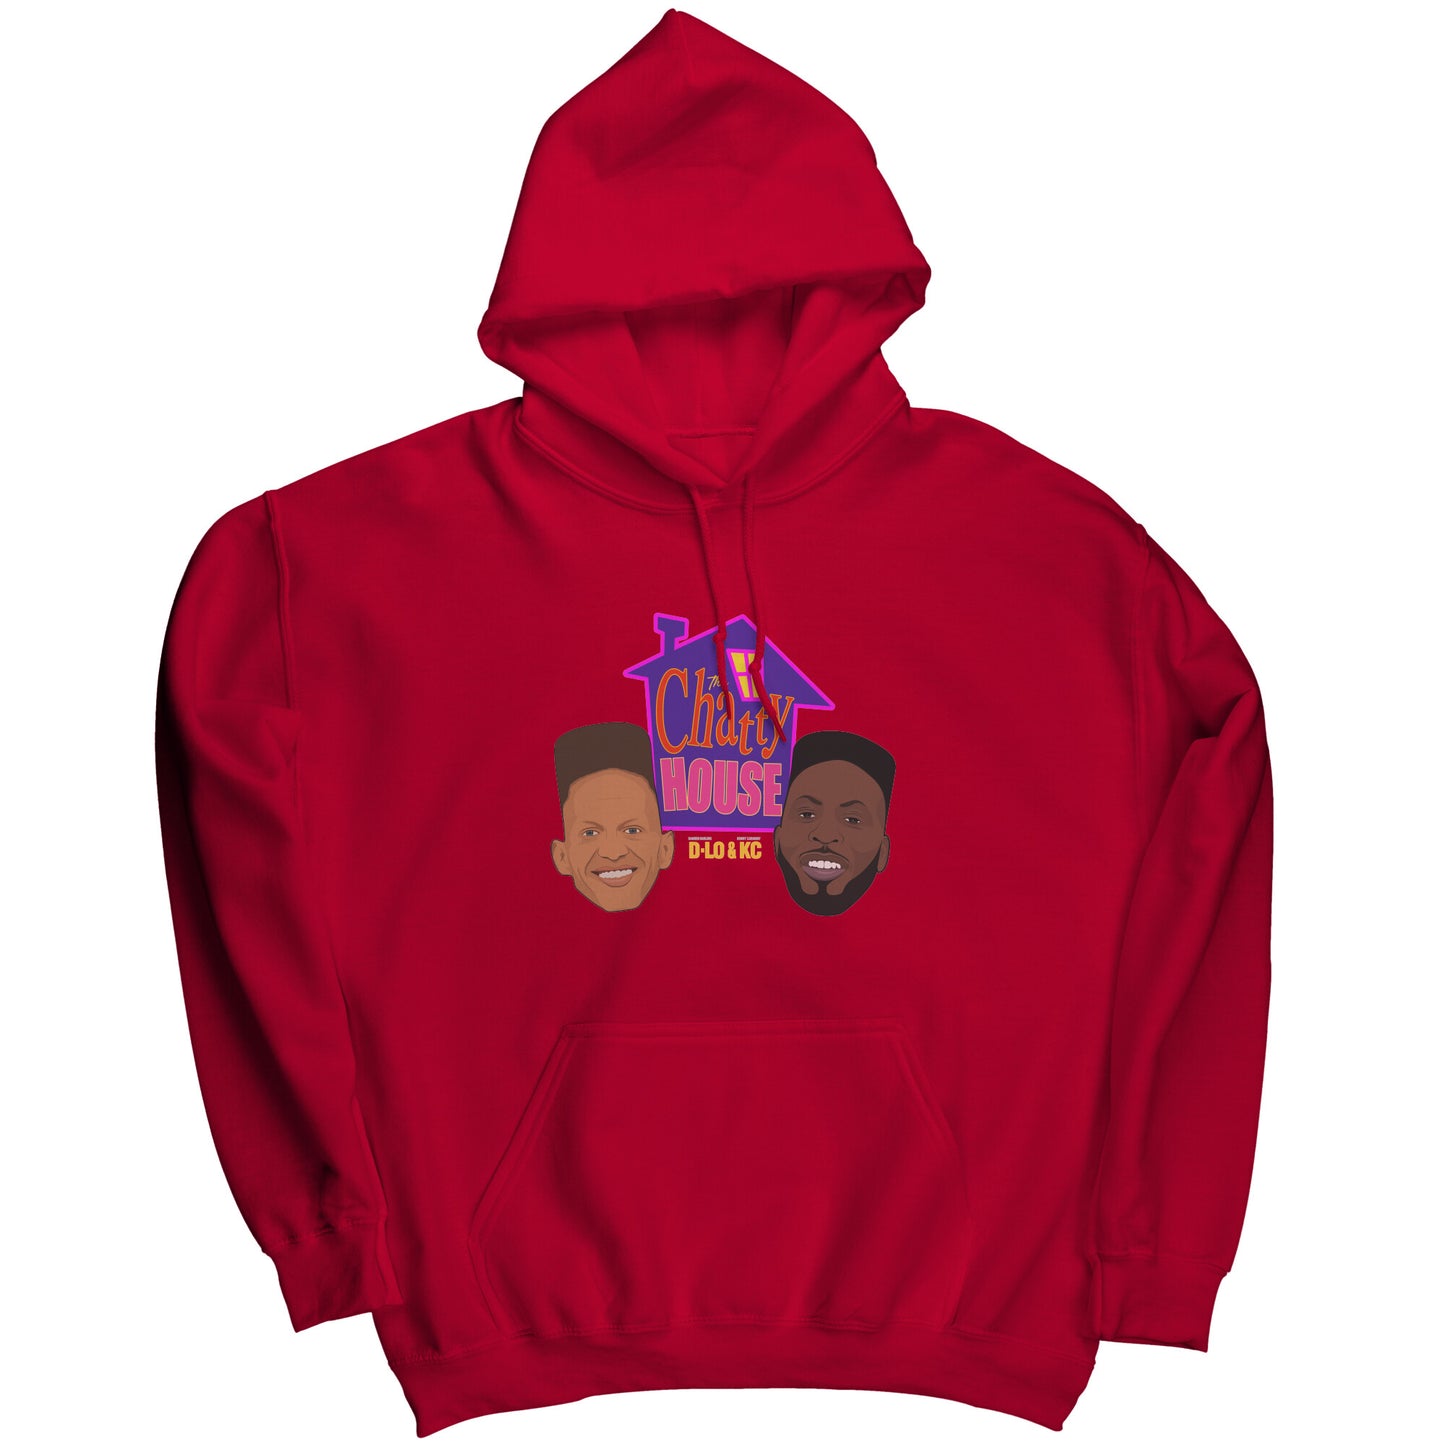 Chatty House Party Hoodie